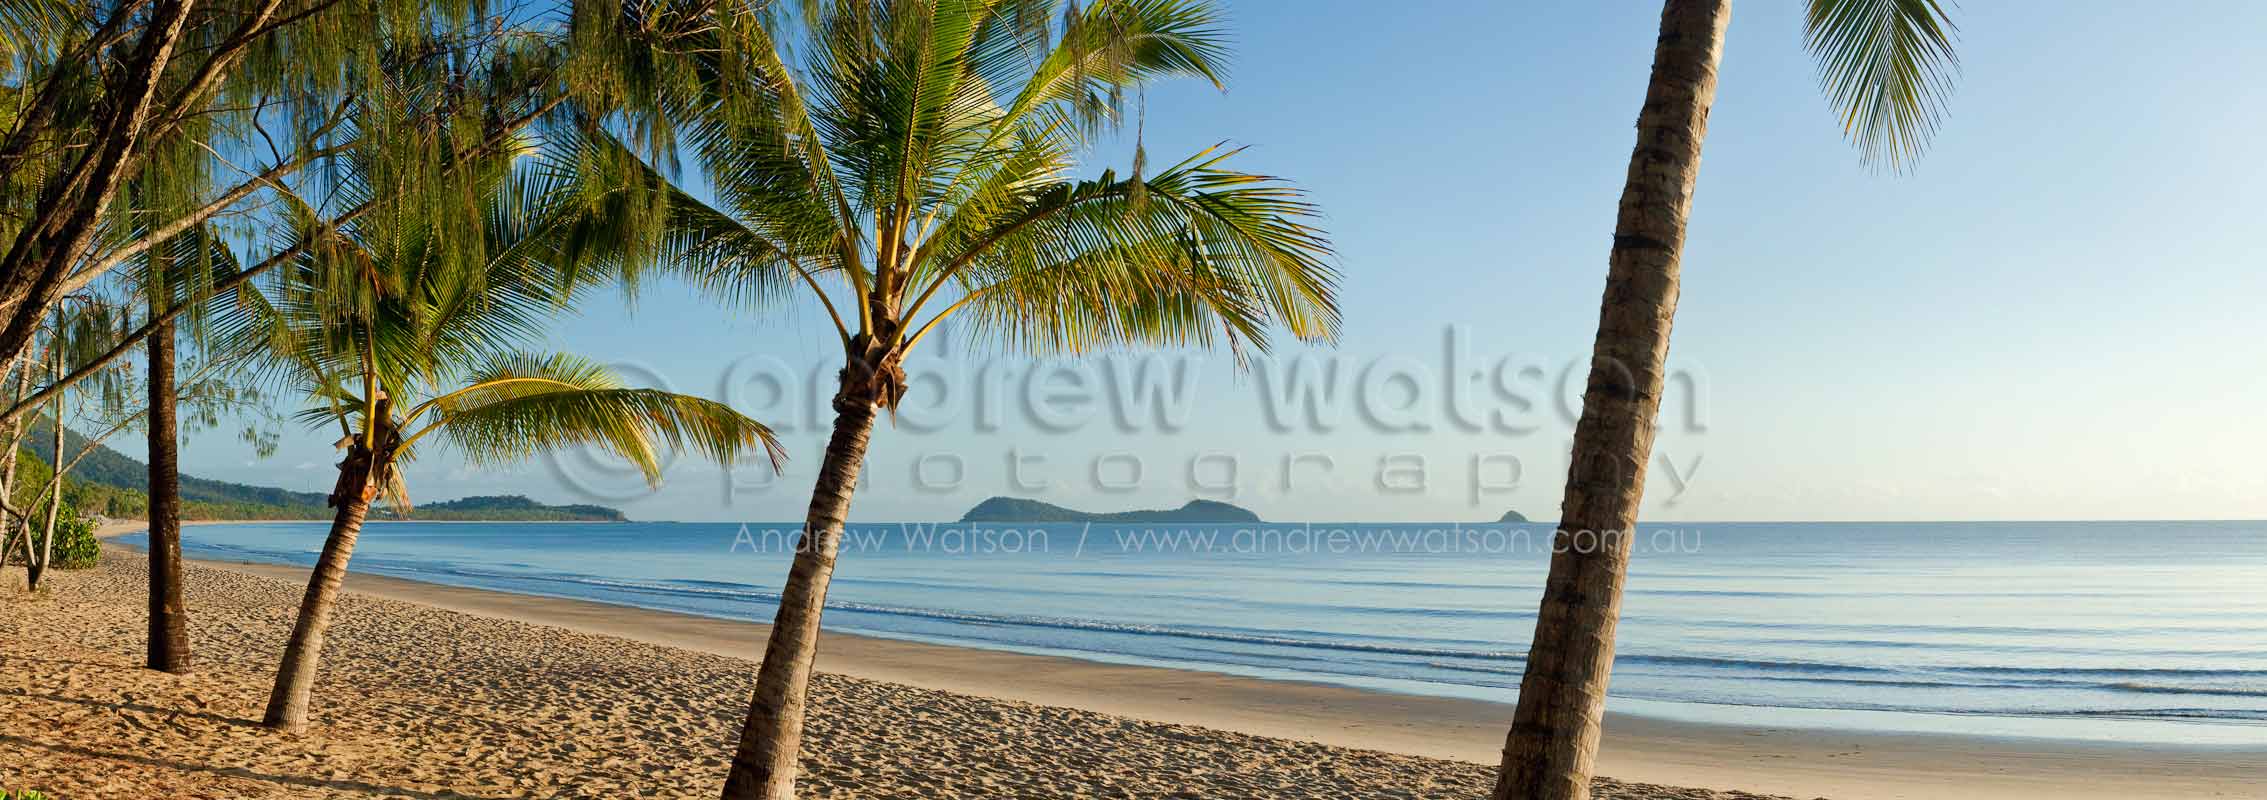 View through coconut palms at Kewarra BeachCairns, North QueenslandImage available for licensing or as a fine-art print... please enquire